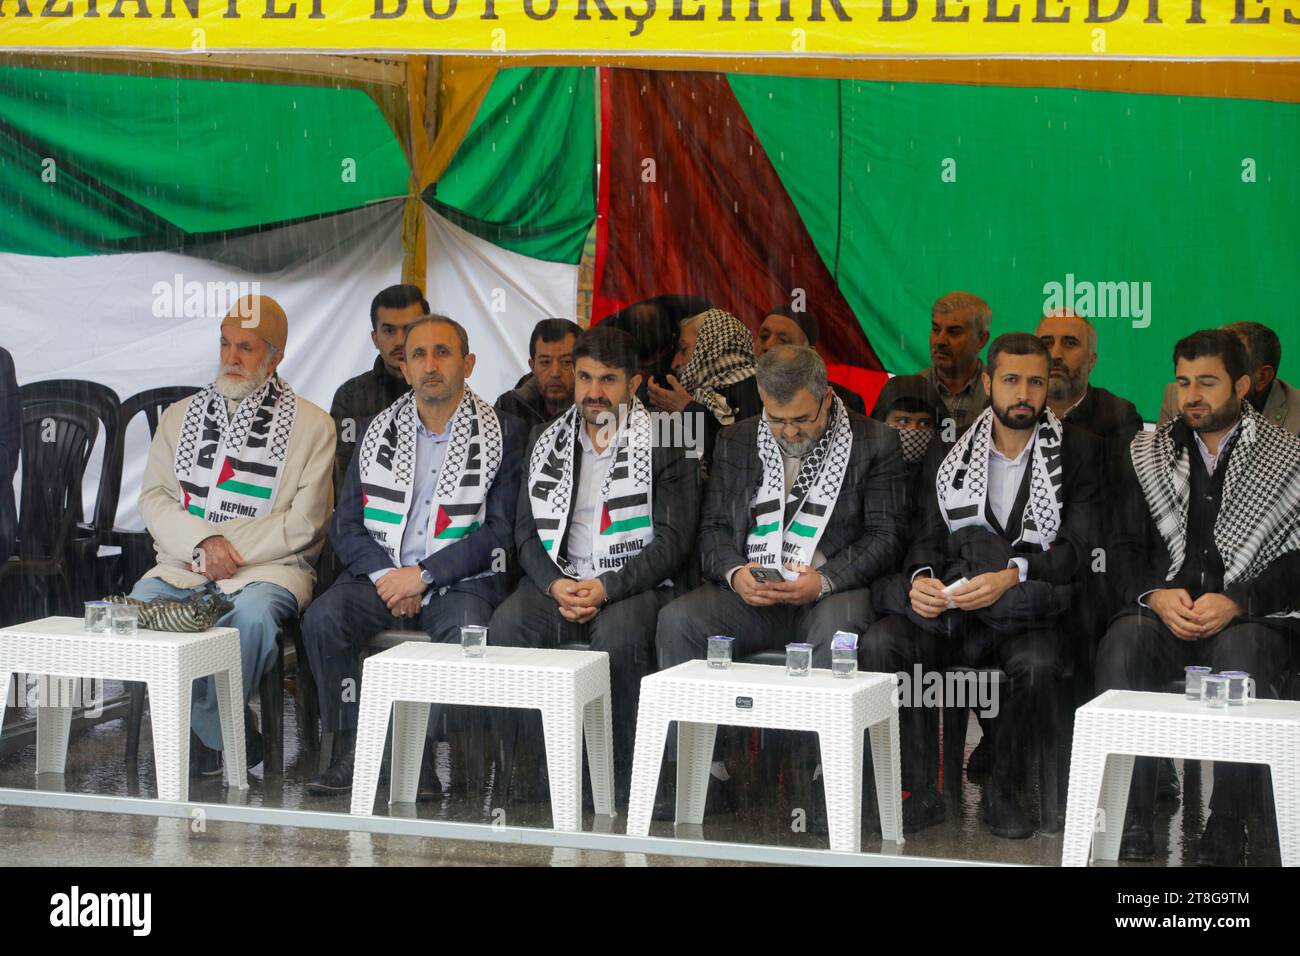 November 19, 2023: Gaziantep, Turkiye. 19 November 2023. Hundreds of people weaving the Palestinian flag gather in Gaziantep in support of Palestinians and of Hamas' recent Al-Aqsa Flood operation. A Hamas senior official, Majid Abu Hasan, joined the demonstration and thanked the Turks for their support of Palestine and of the Al-Qassam Brigades. Abu Hasan also explained that the Al-Aqsa Battle of Flood aimed at freeing Palestinian prisoners held in Israeli prisons, among whom are elderly, youths, women and children (Credit Image: © Zakariya Yahya/IMAGESLIVE via ZUMA Press Wire) EDITORIAL USAG Stock Photo